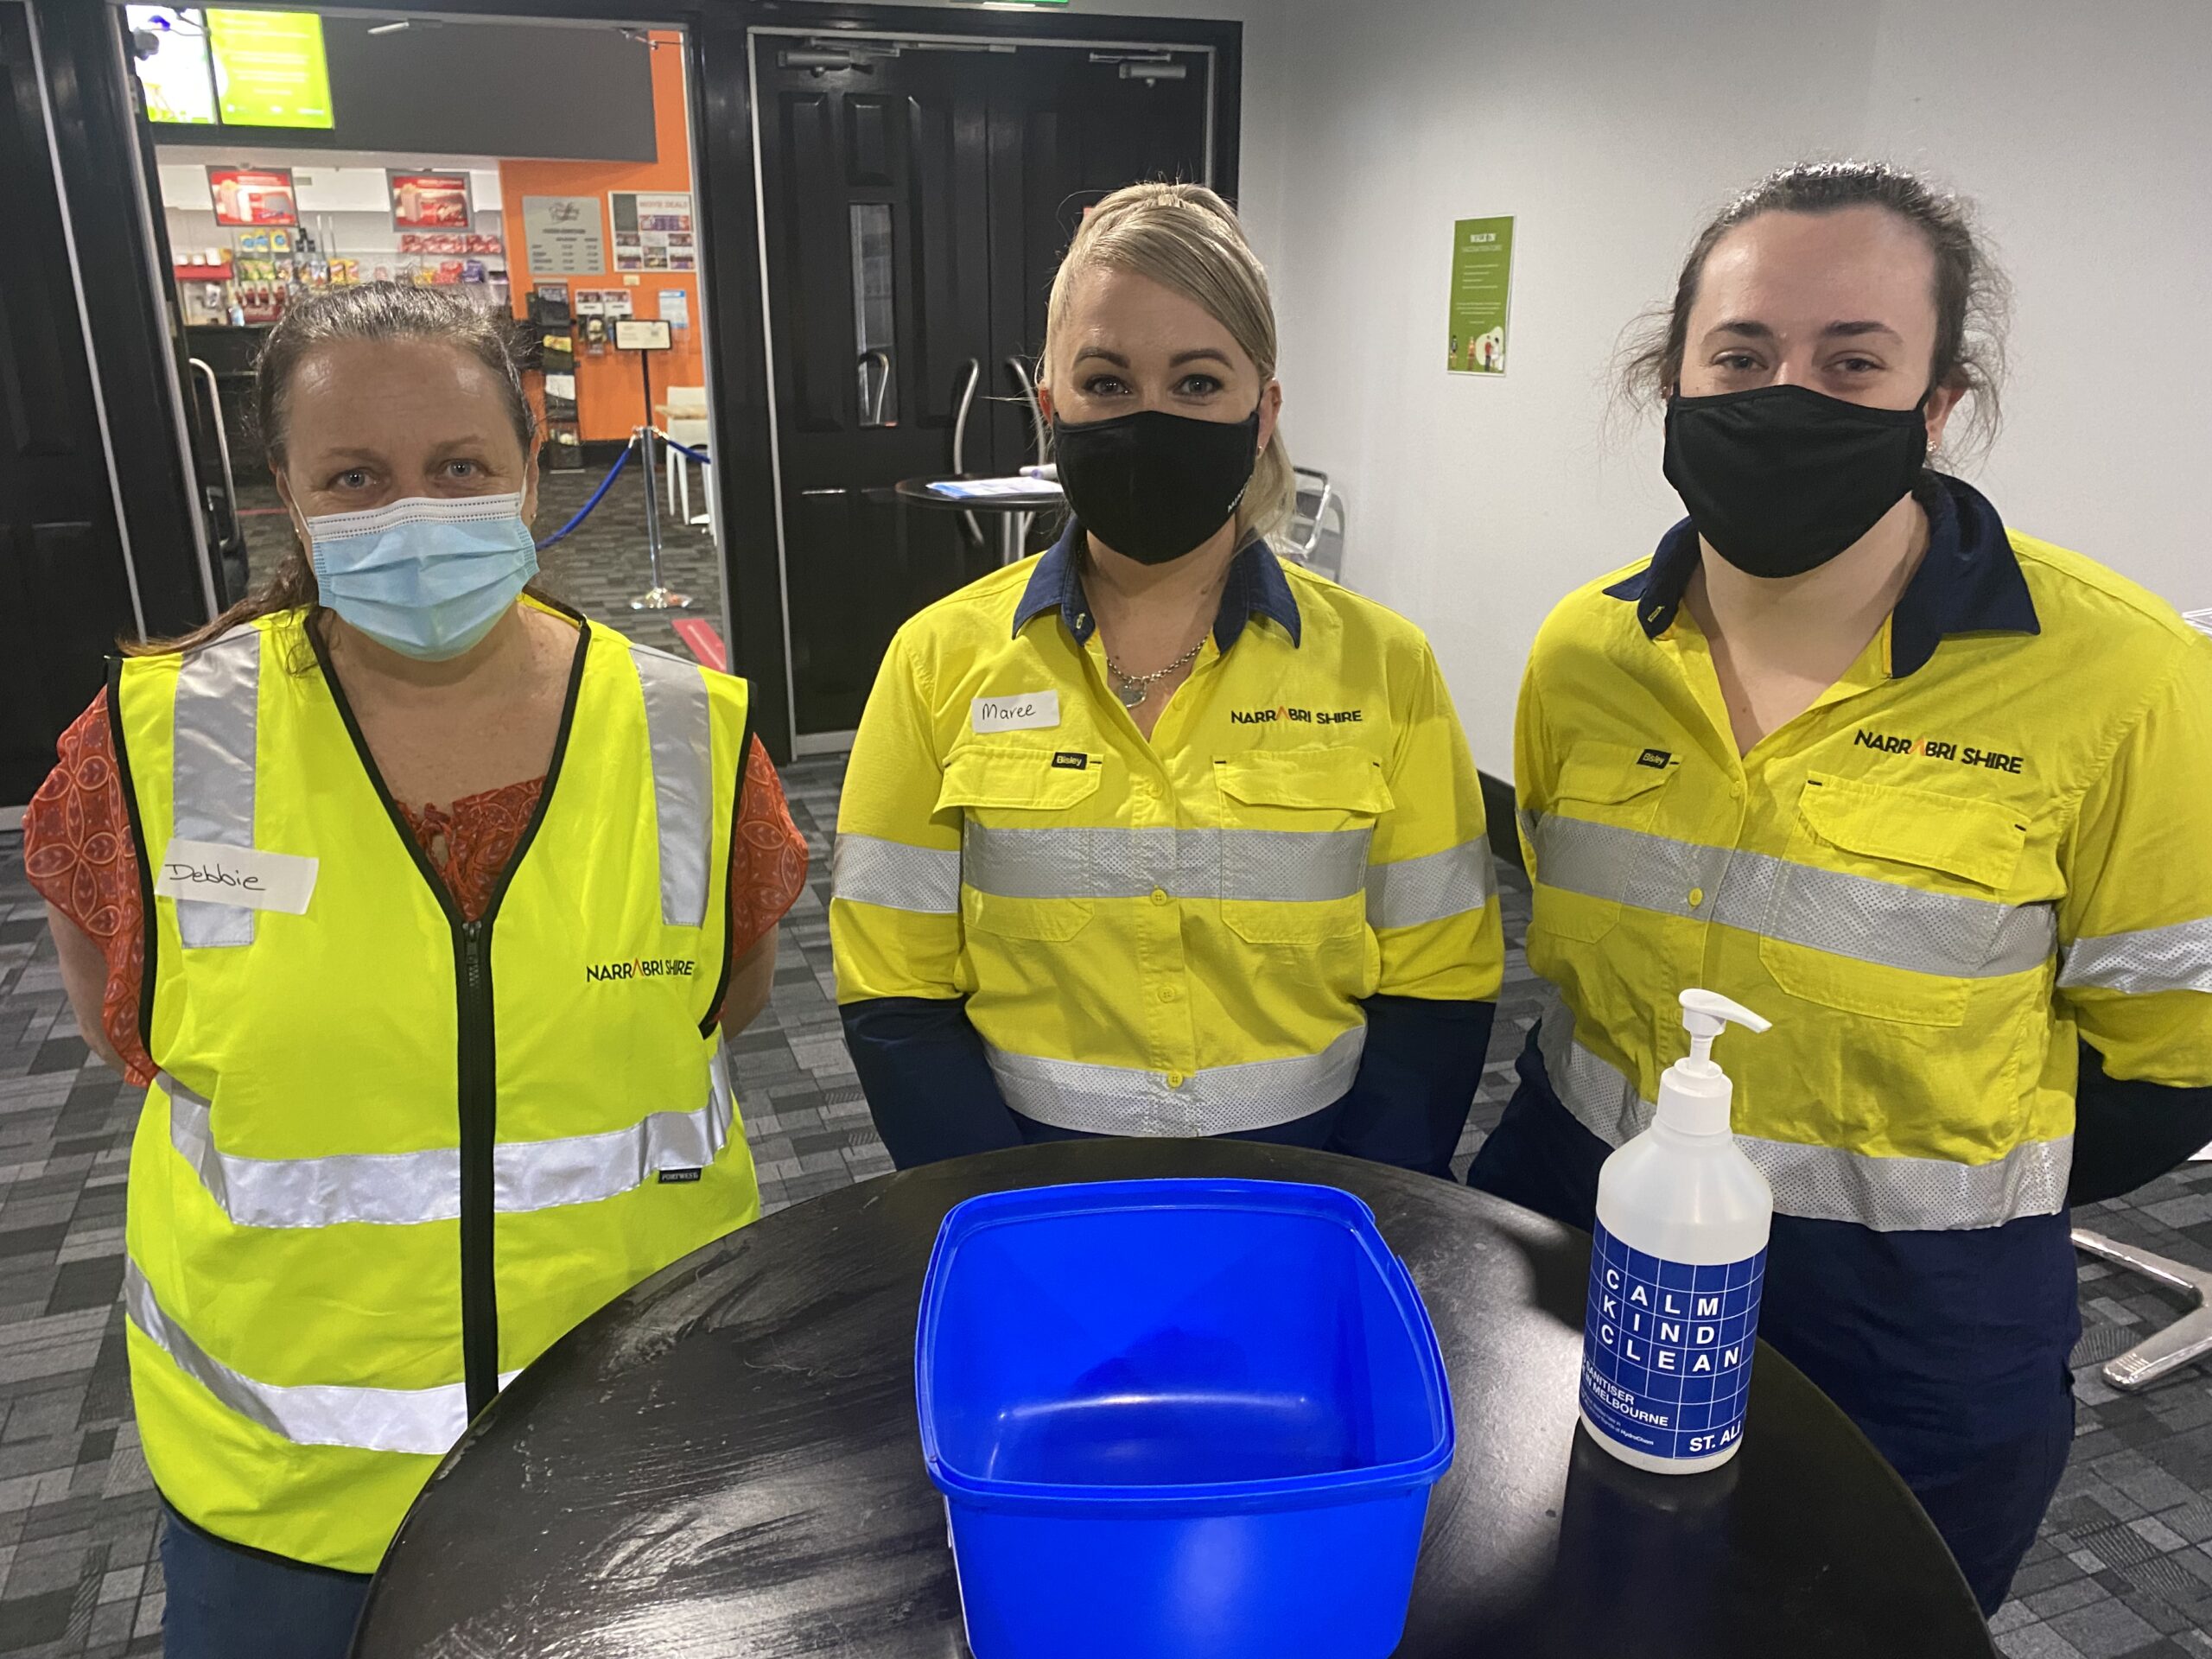 Narrabri Shire Council staff were among the volunteers at the vaccination hub on Sunday, from left, Debbie Foster, Maree Bales and Emma Lockyer.